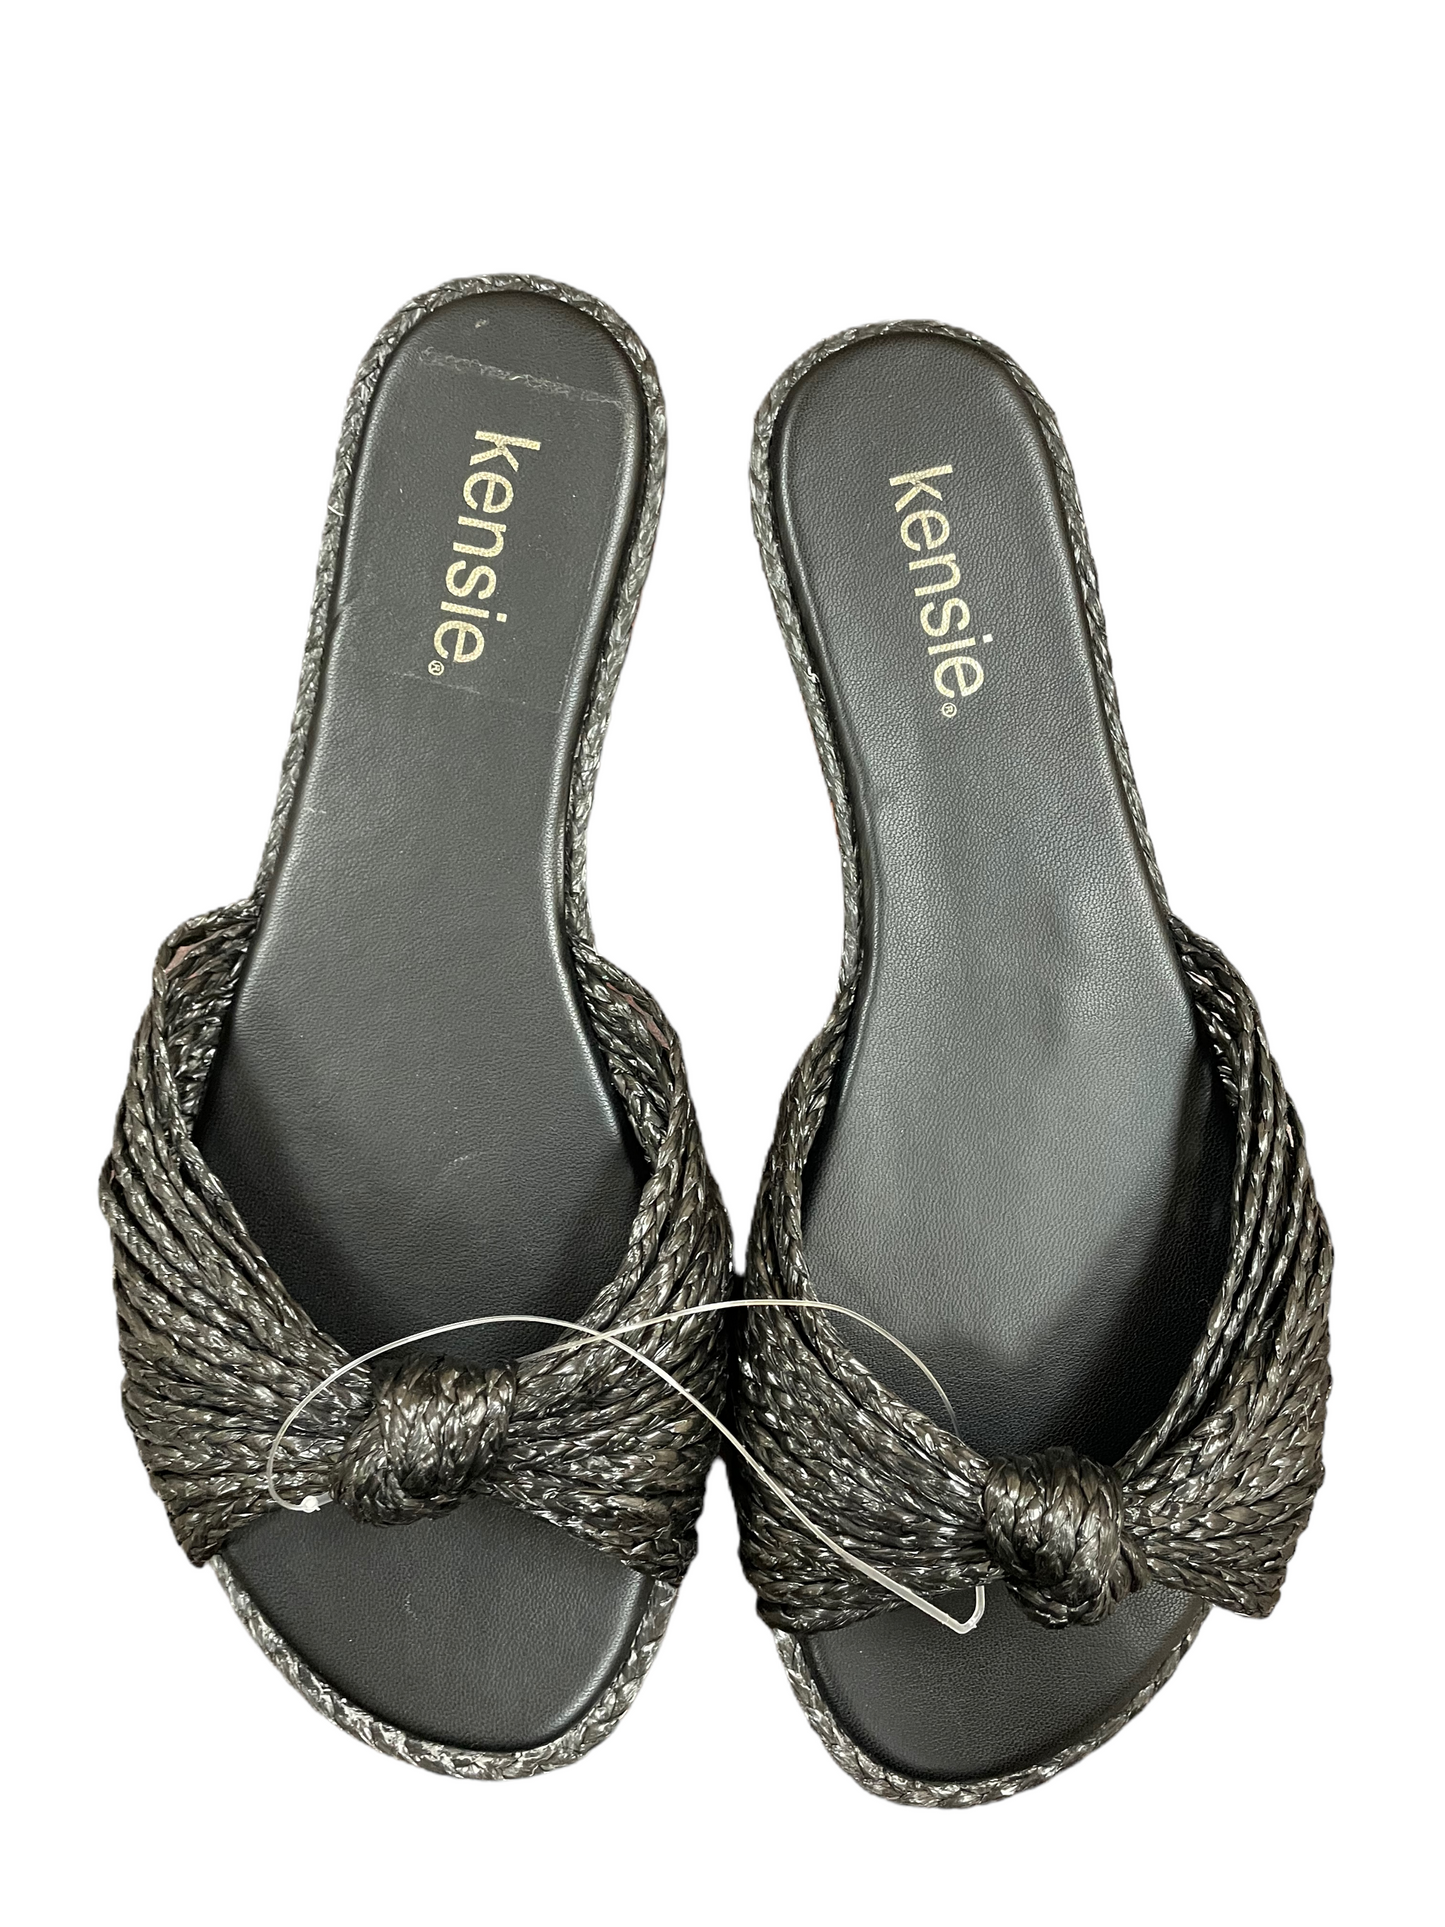 Sandals Flats By Kensie  Size: 8